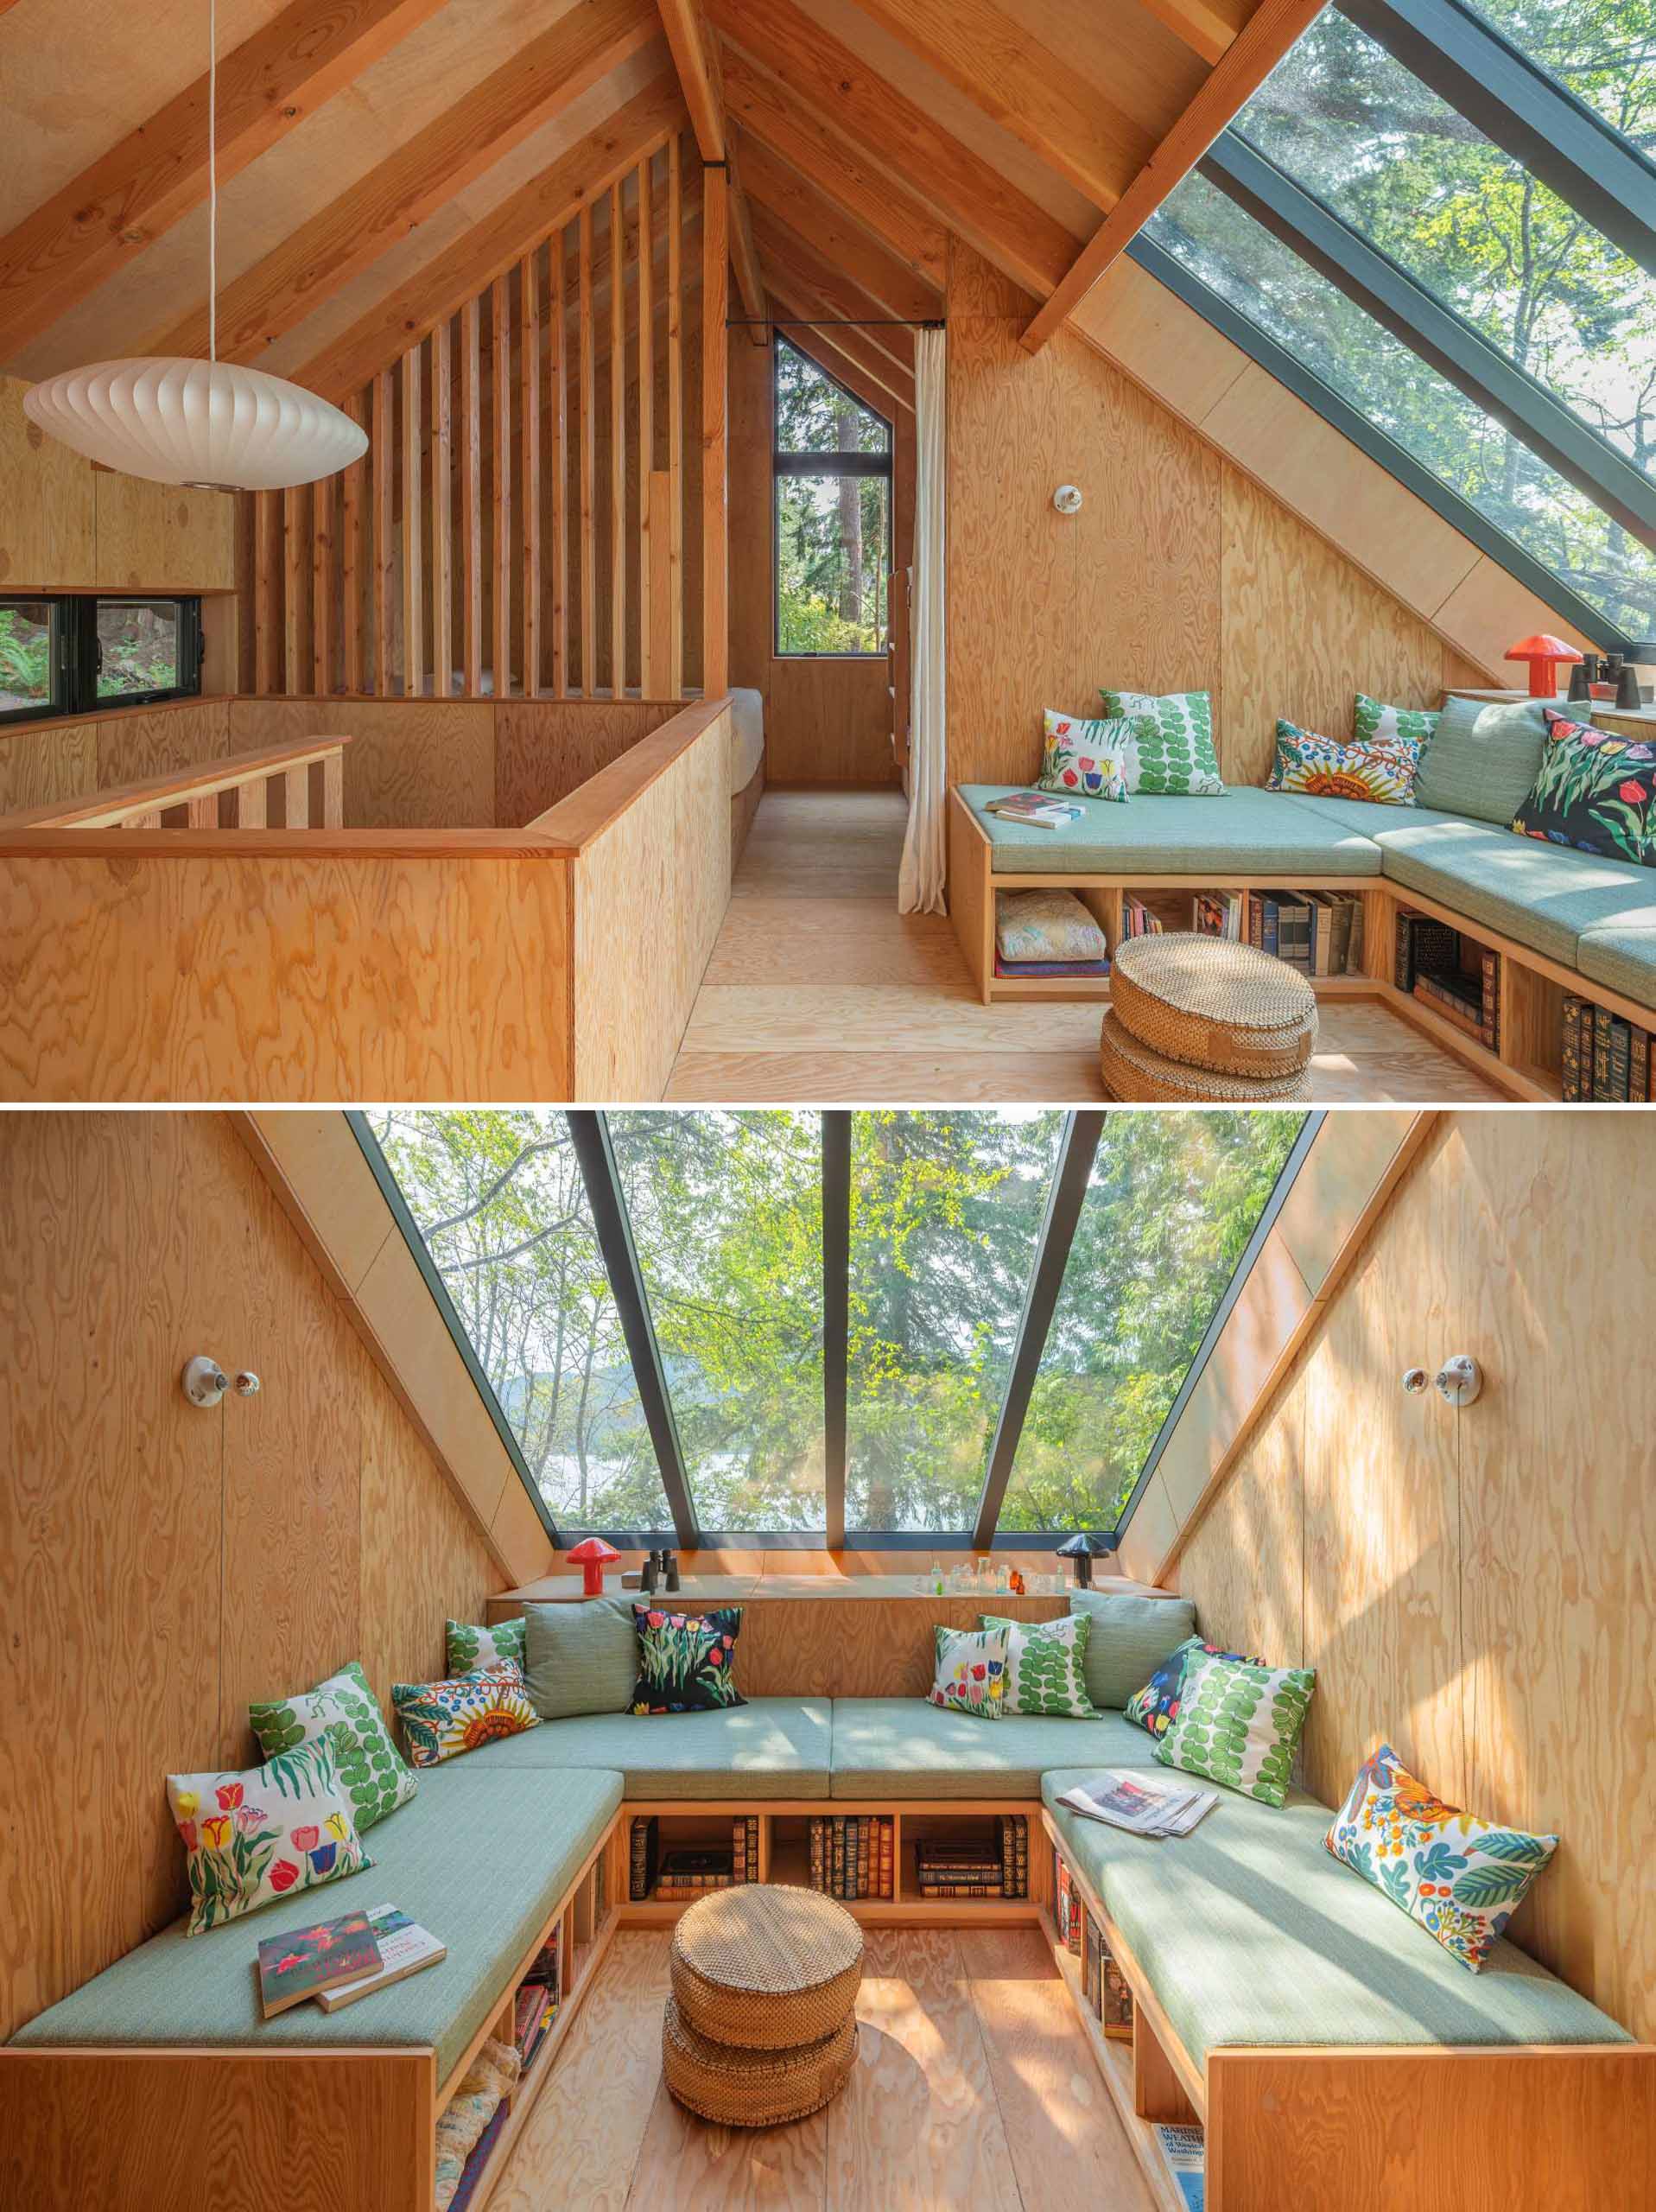 At the top of the stairs in this cabin, there's an open lounge area beneath custom skylights. Custom furniture with open storage underneath is topped with upholstered cushions, creating a cozy lounge.